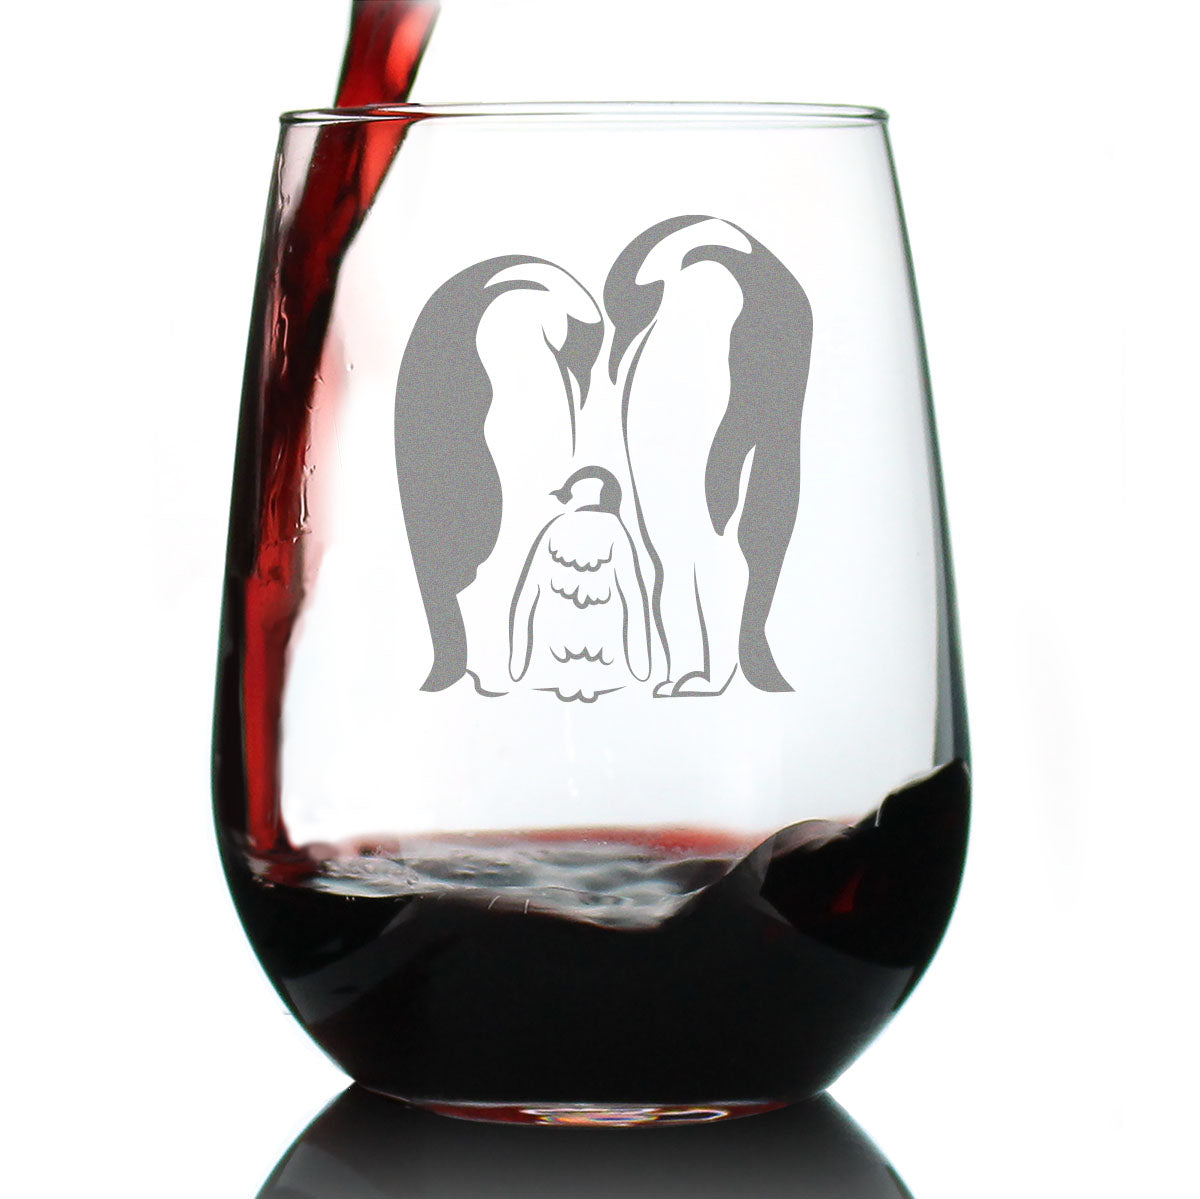 Penguin Family - Stemless Wine Glass - Mom, Dad, Baby Penguin Themed Gifts and Decor - Large 17 oz